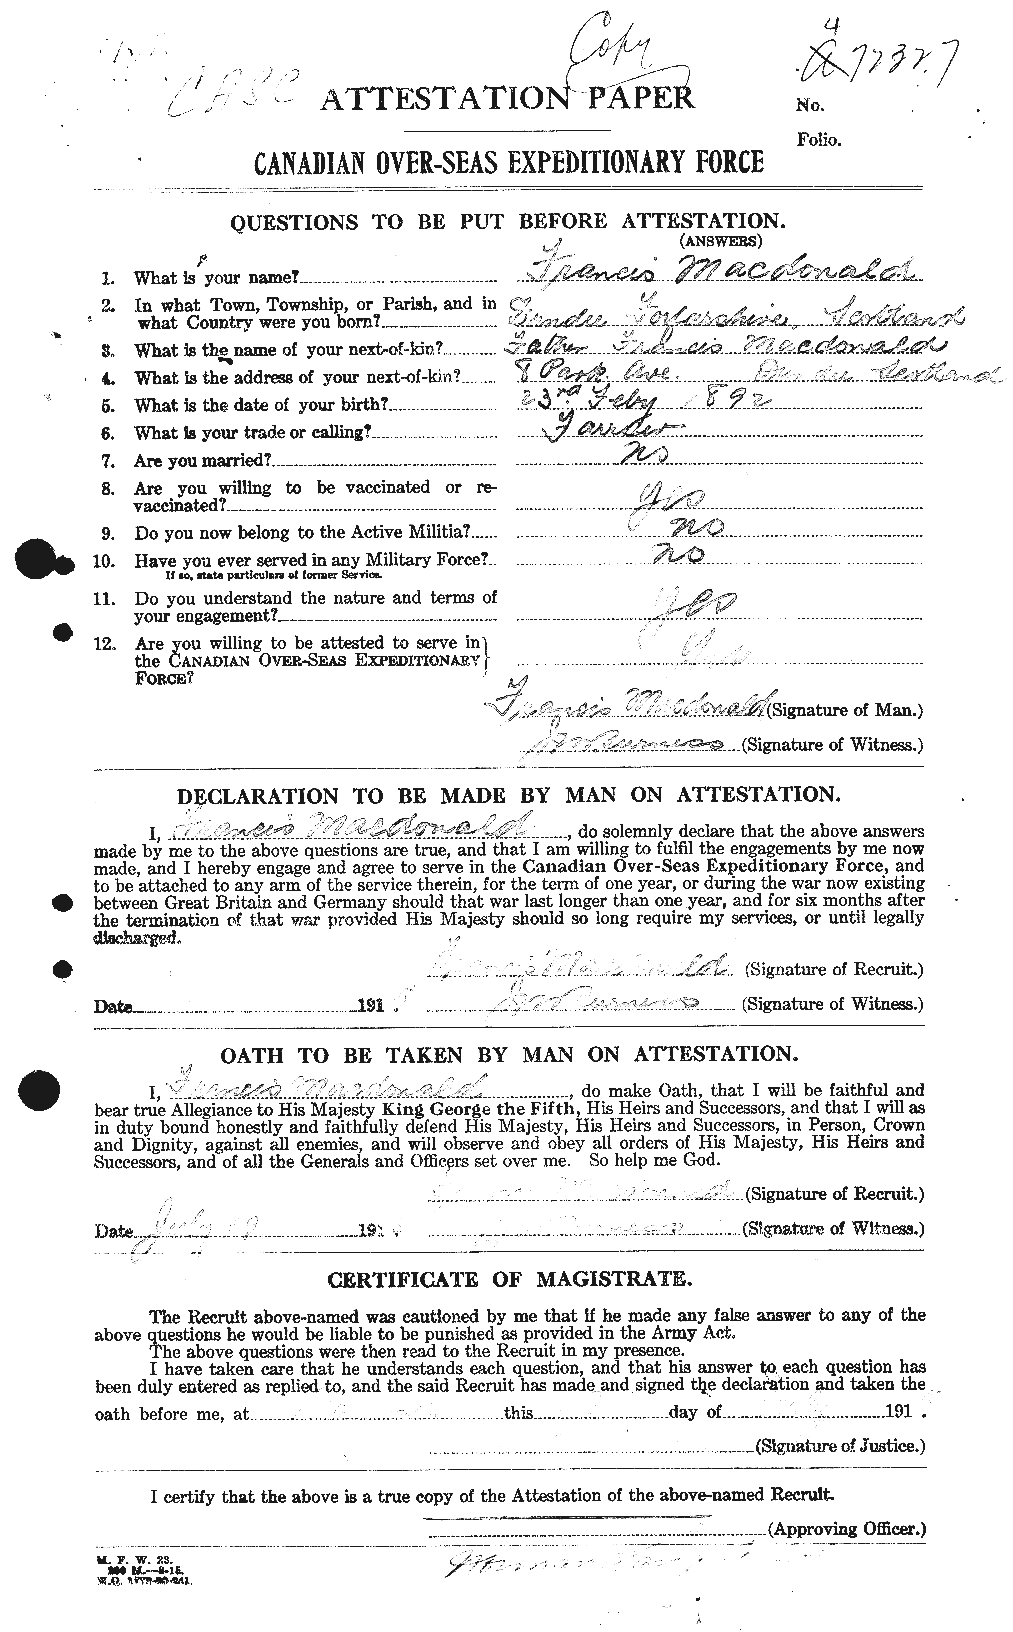 Personnel Records of the First World War - CEF 517423a